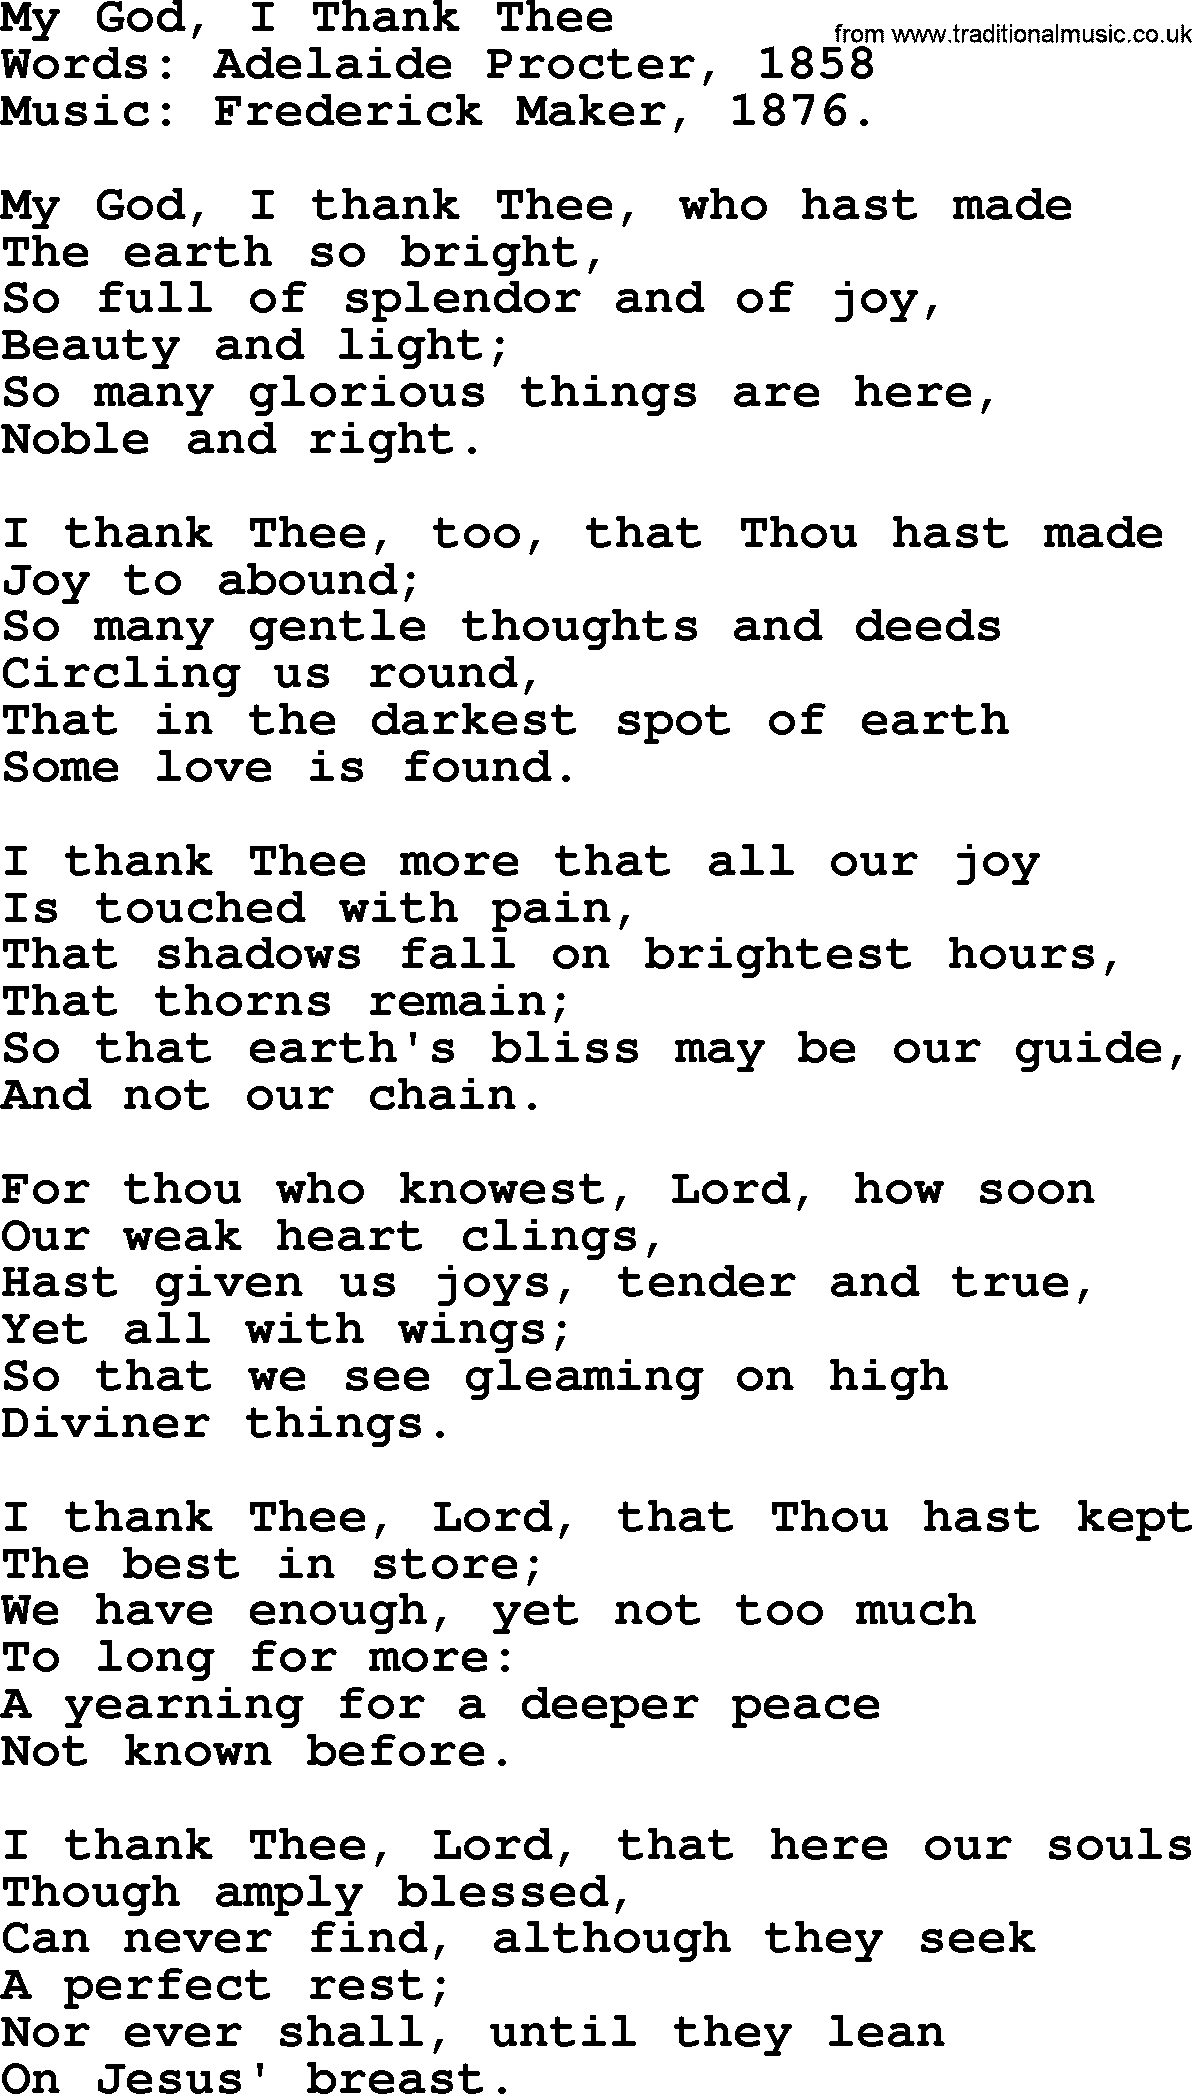 Thanksgiving and Harvest Hymns & Songs My God, I Thank Thee lyrics